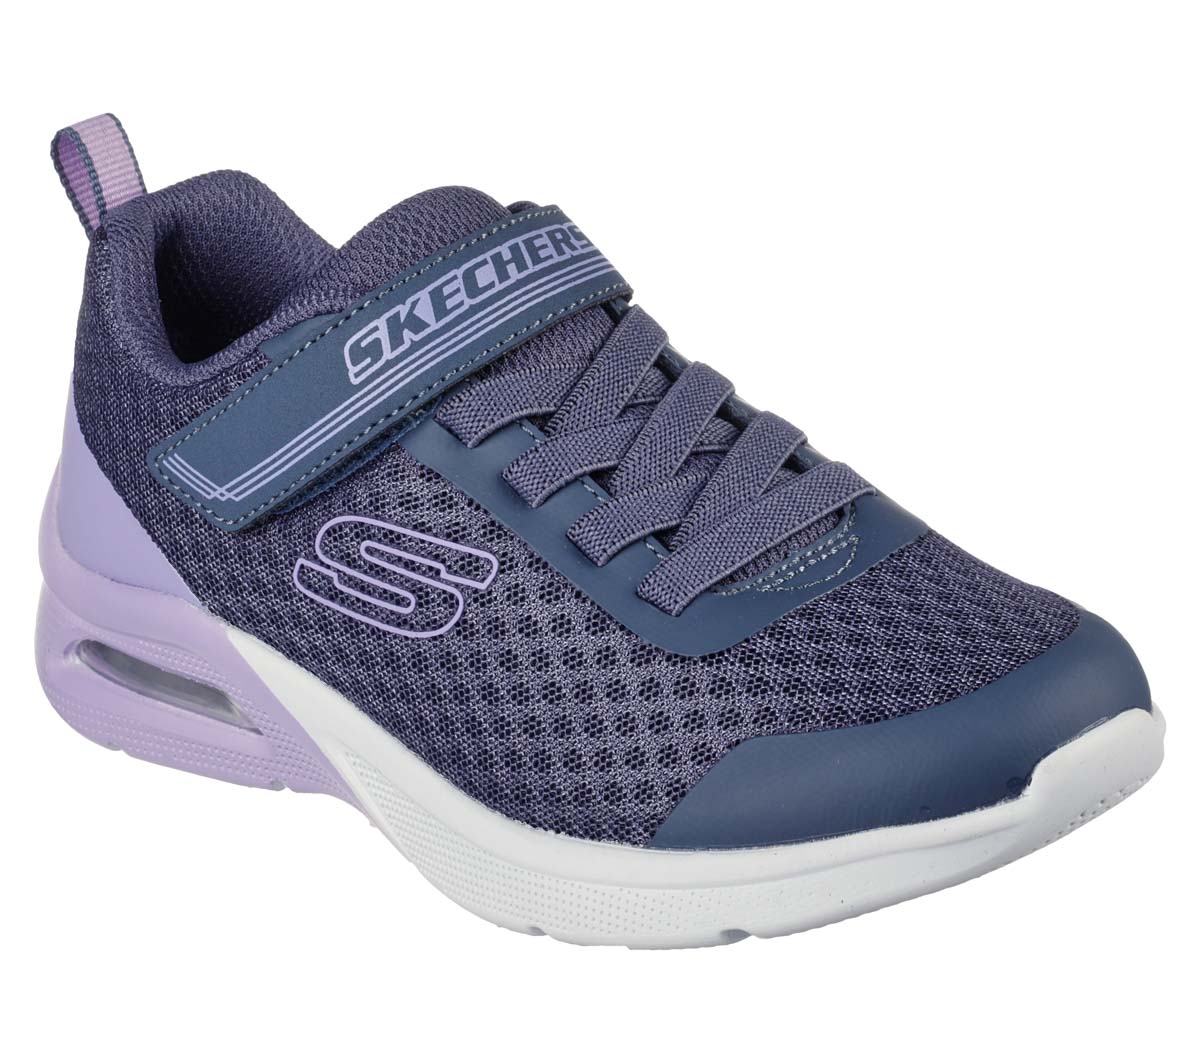 Skechers Microspec Max Bungee Charcoal Kids Girls Trainers 302343L In Size 33 In Plain Charcoal For kids